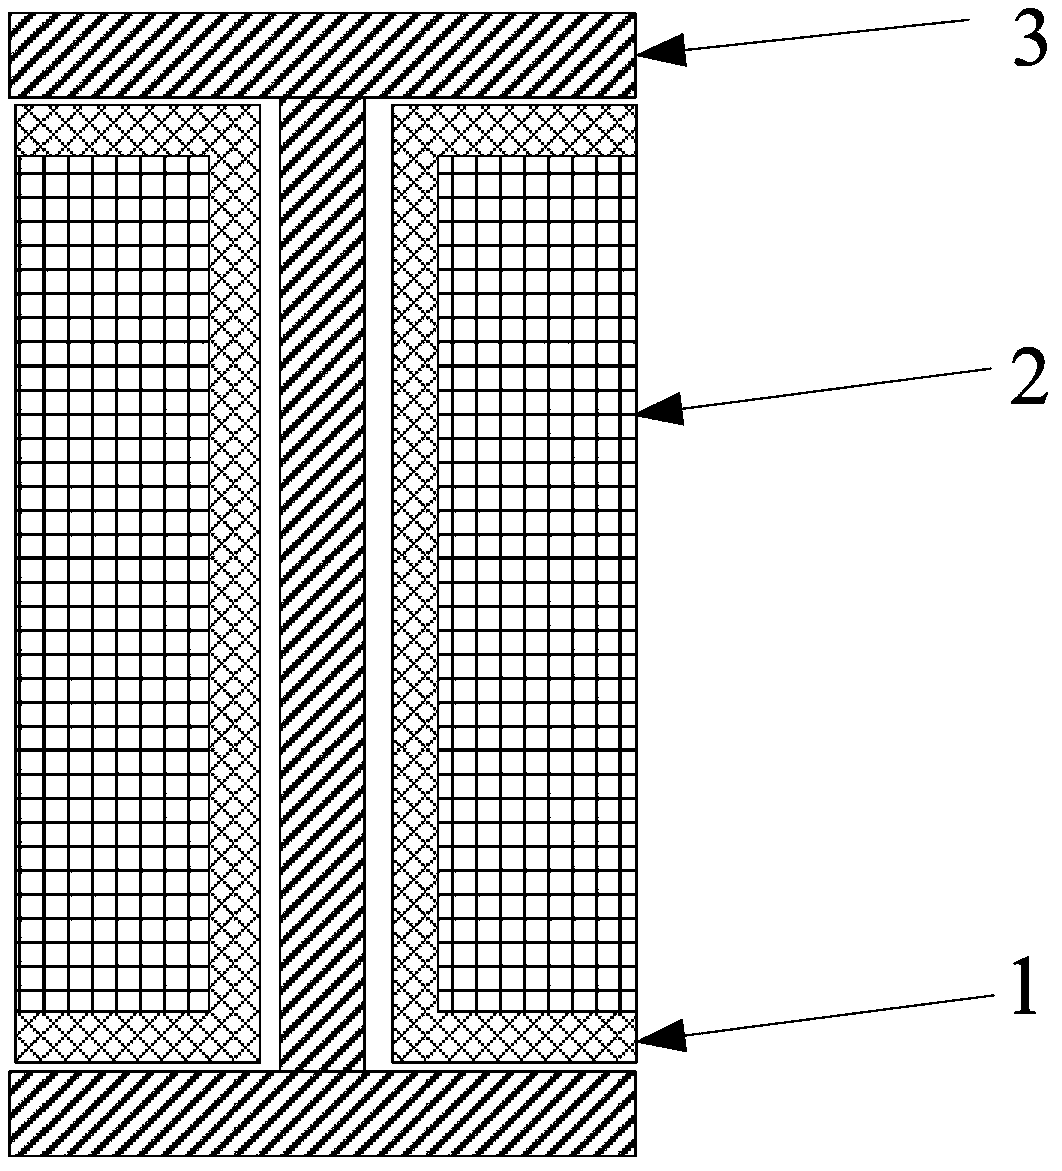 Combined die and its application in molding composite material structure member